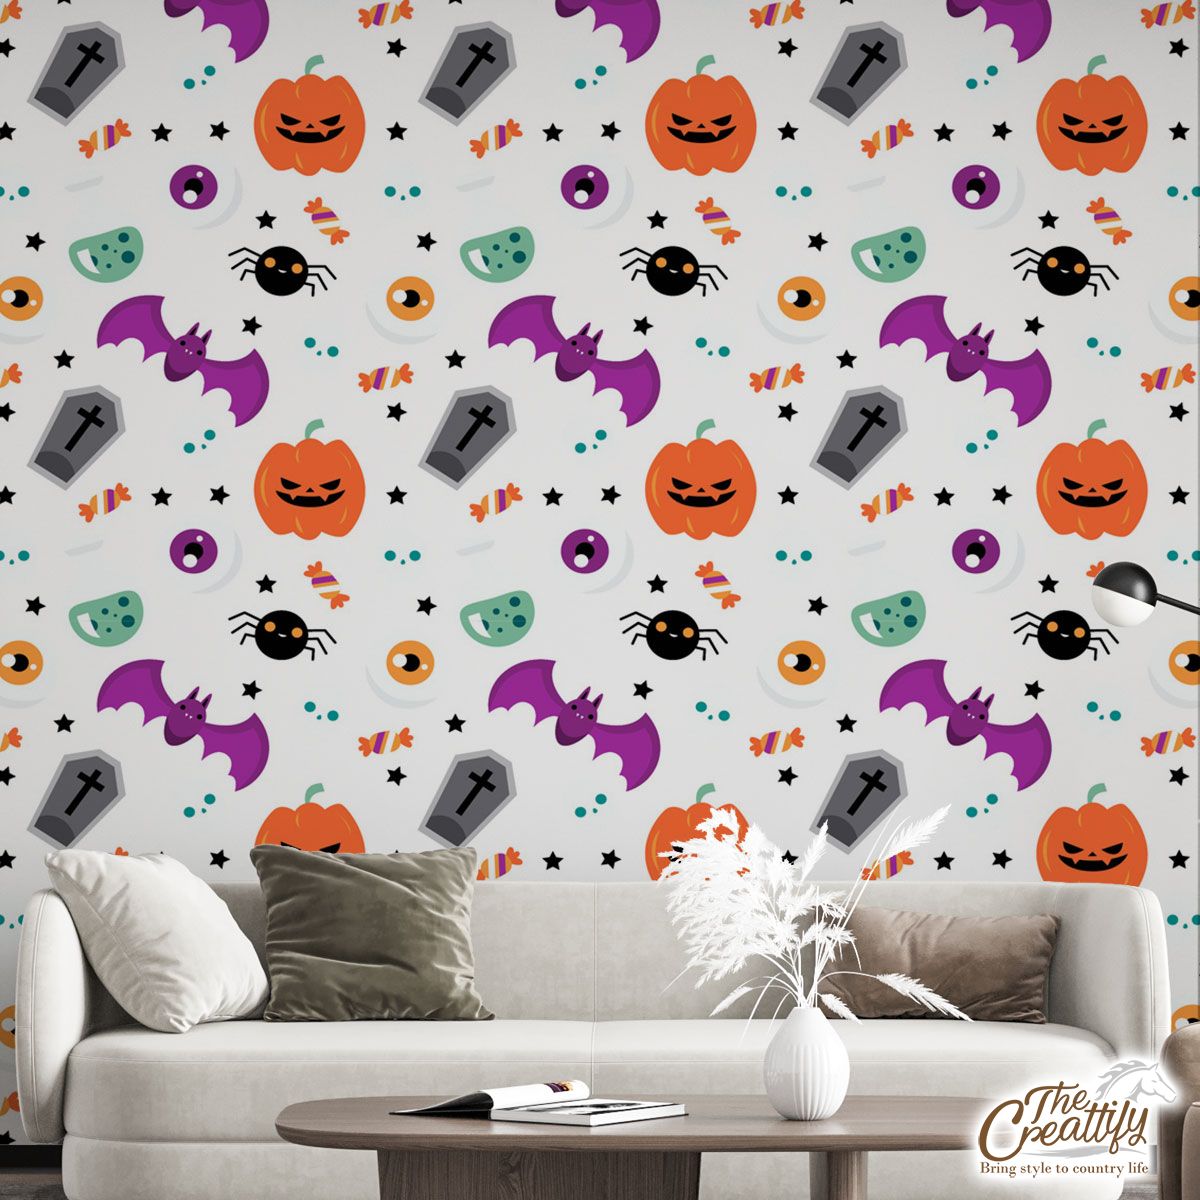 Cute Halloween Pumpkin Face, Jack O Lantern, Halloween Skeleton, Wicked Witches, Spider Wall Mural